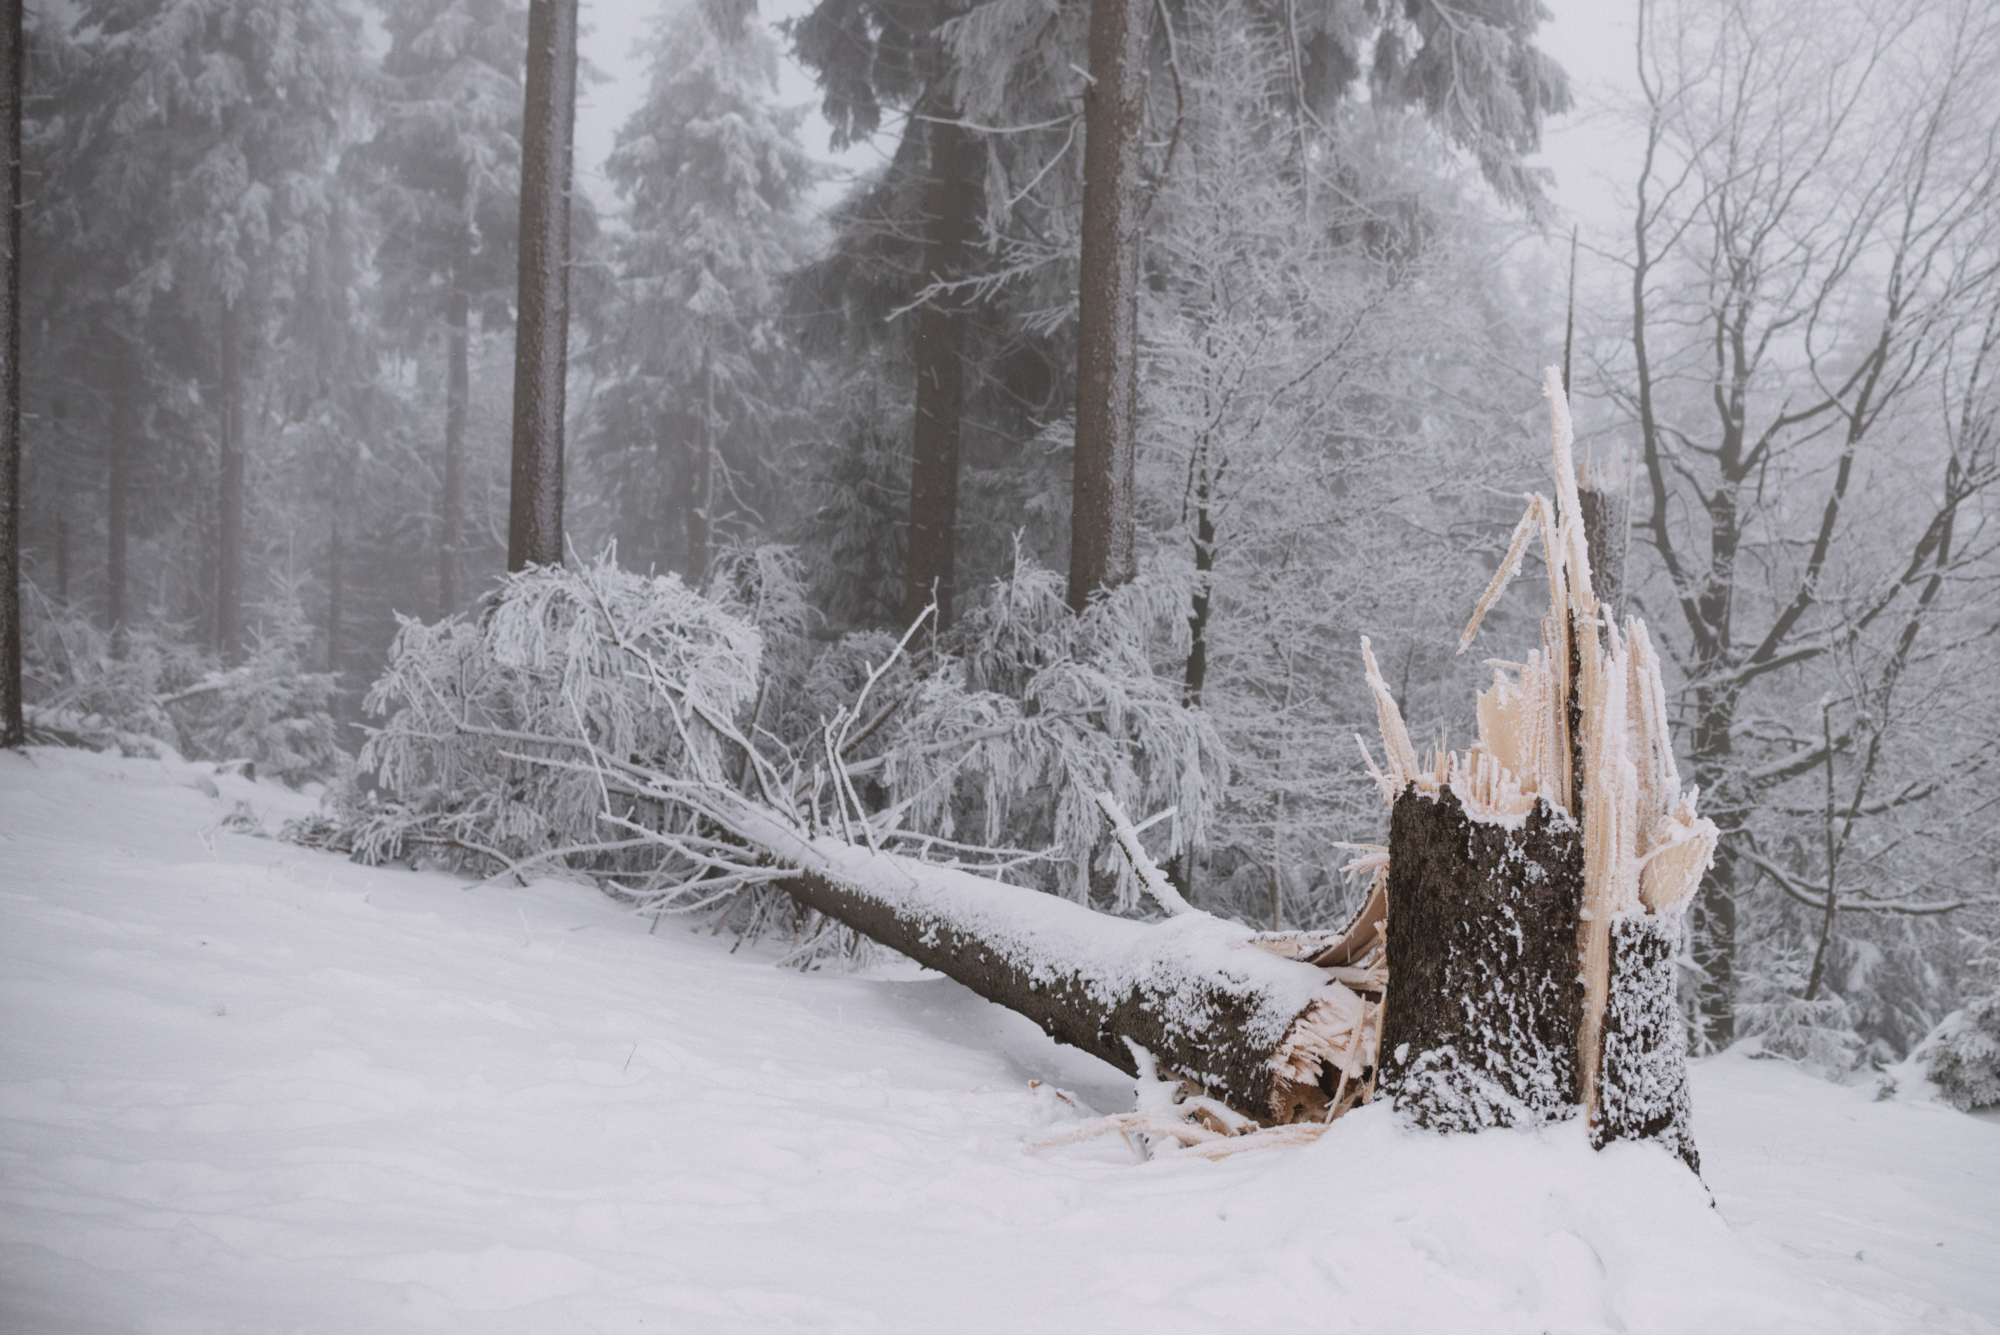 A tree covered in snow, fallen over in the forest during winter.